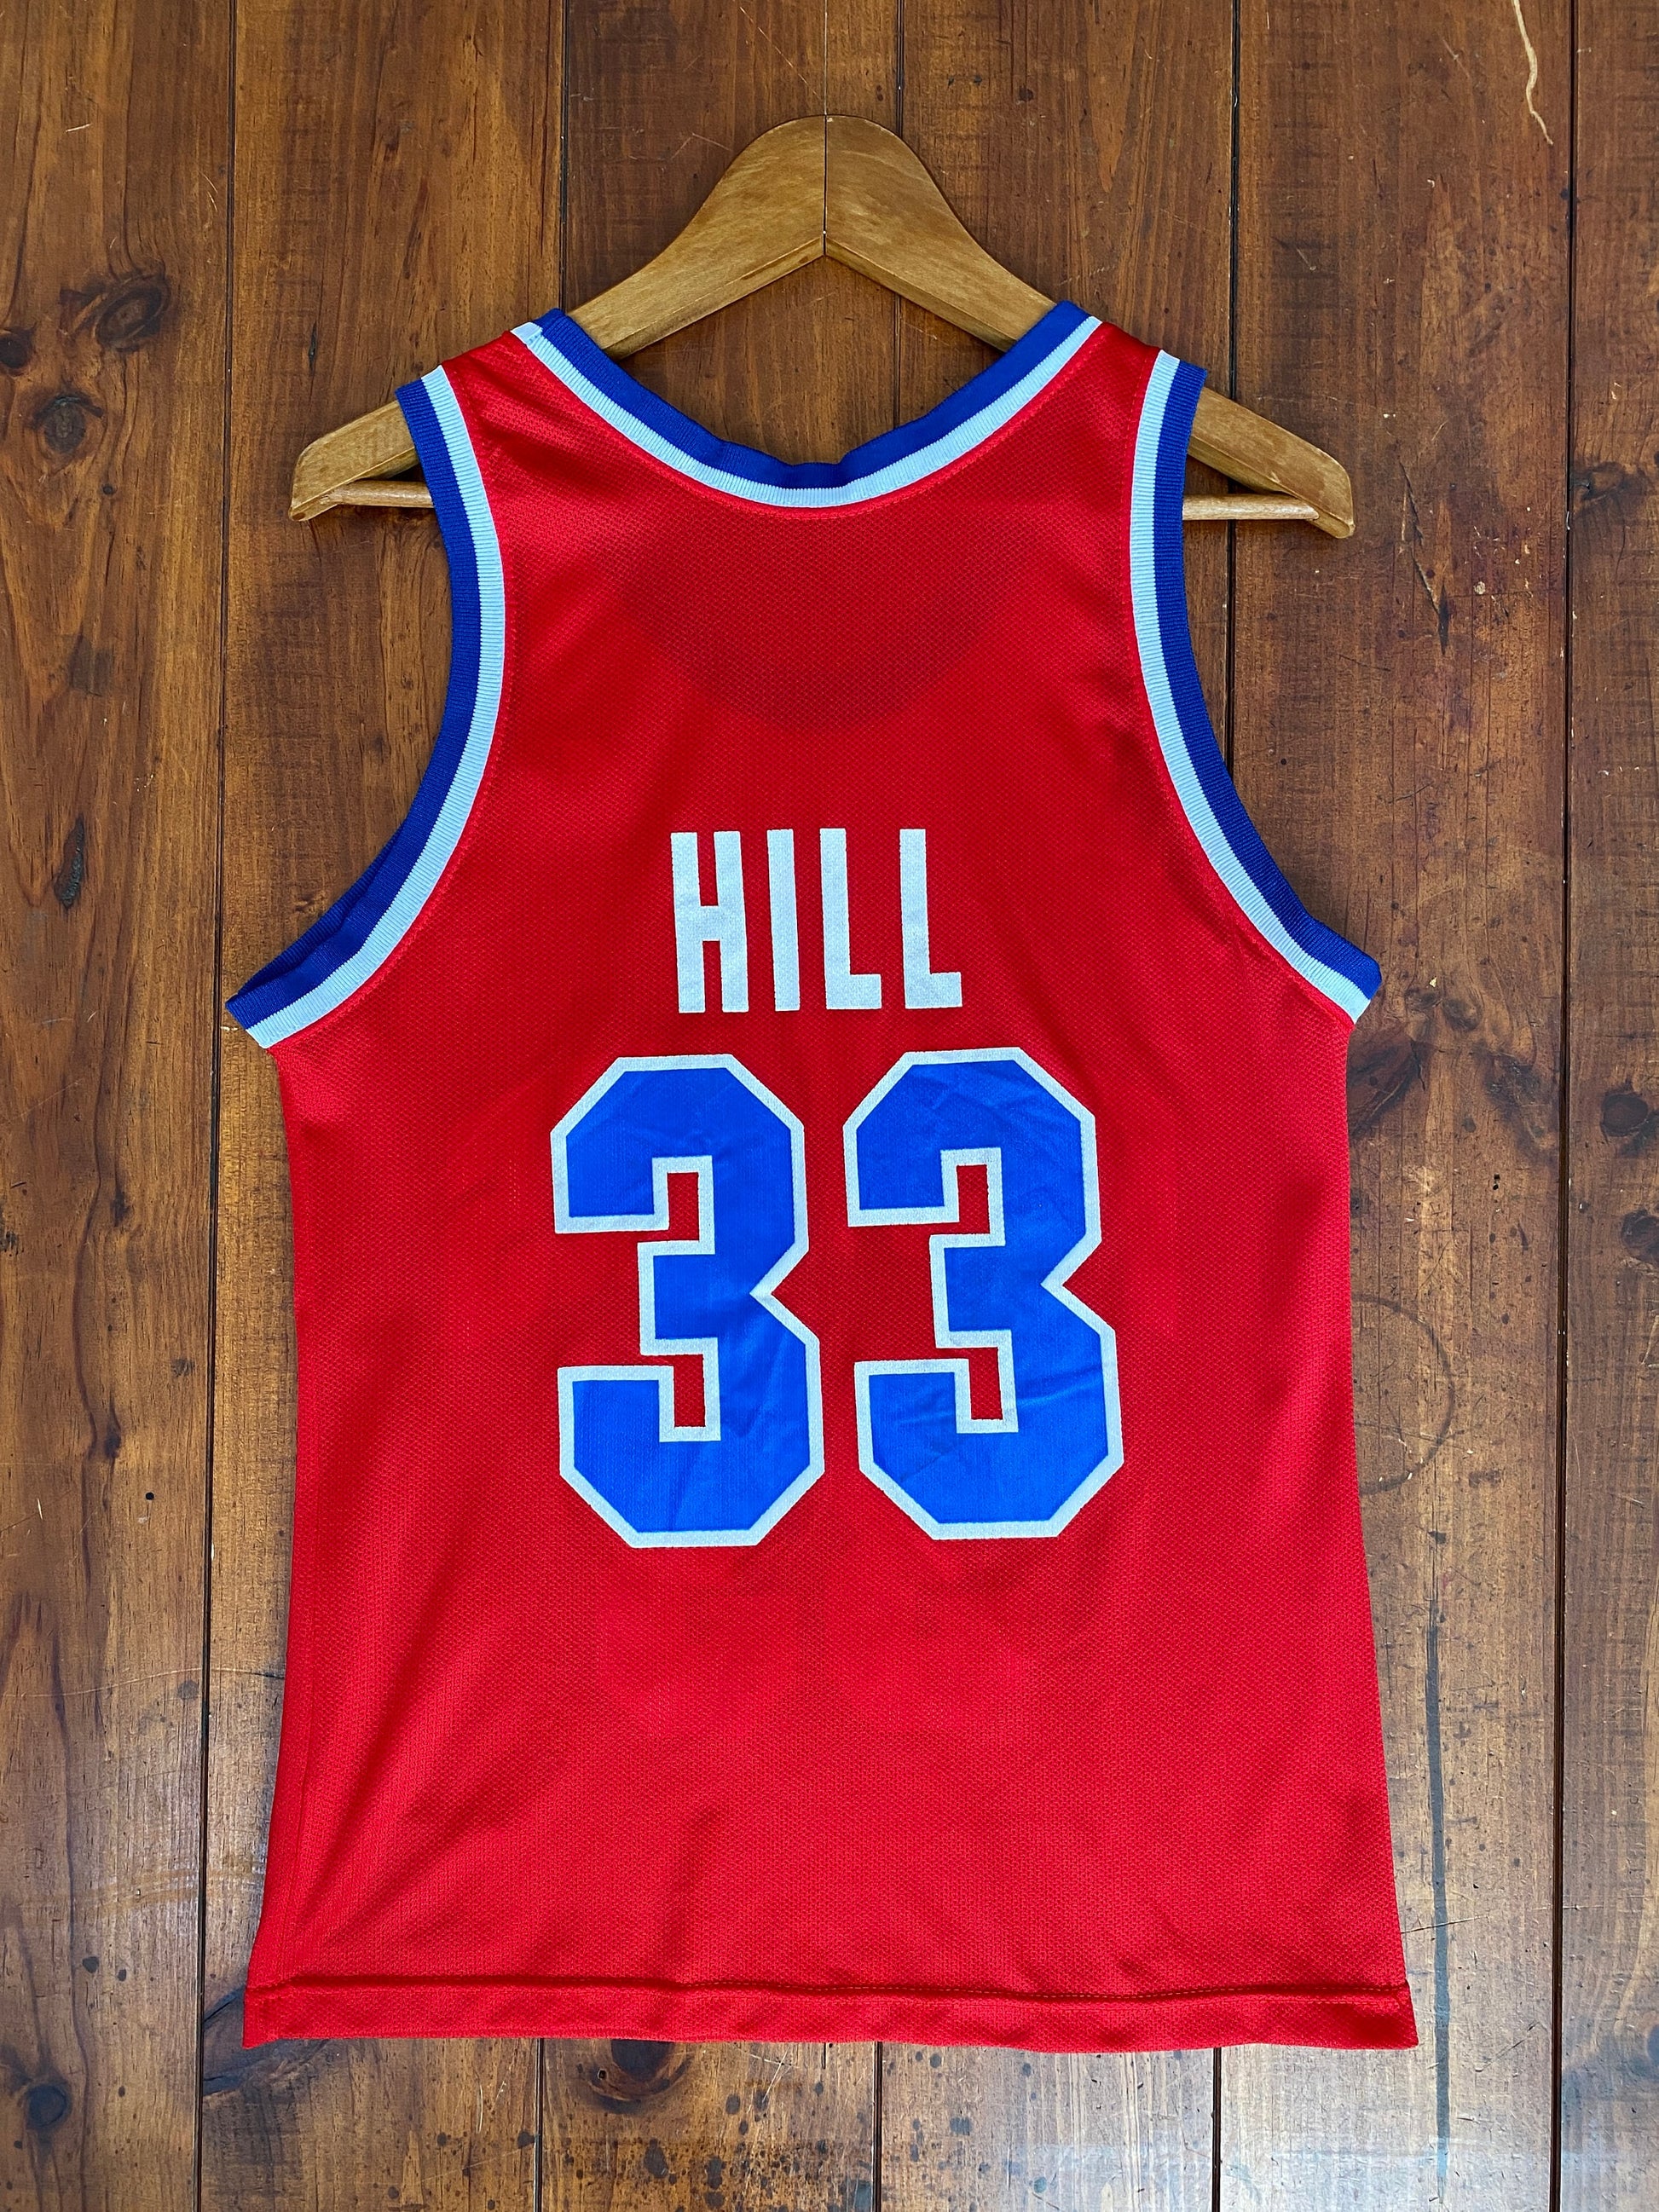 Piston 90s Vintage NBA Jersey #33 Hill - Size 36, Made in USA by Champion